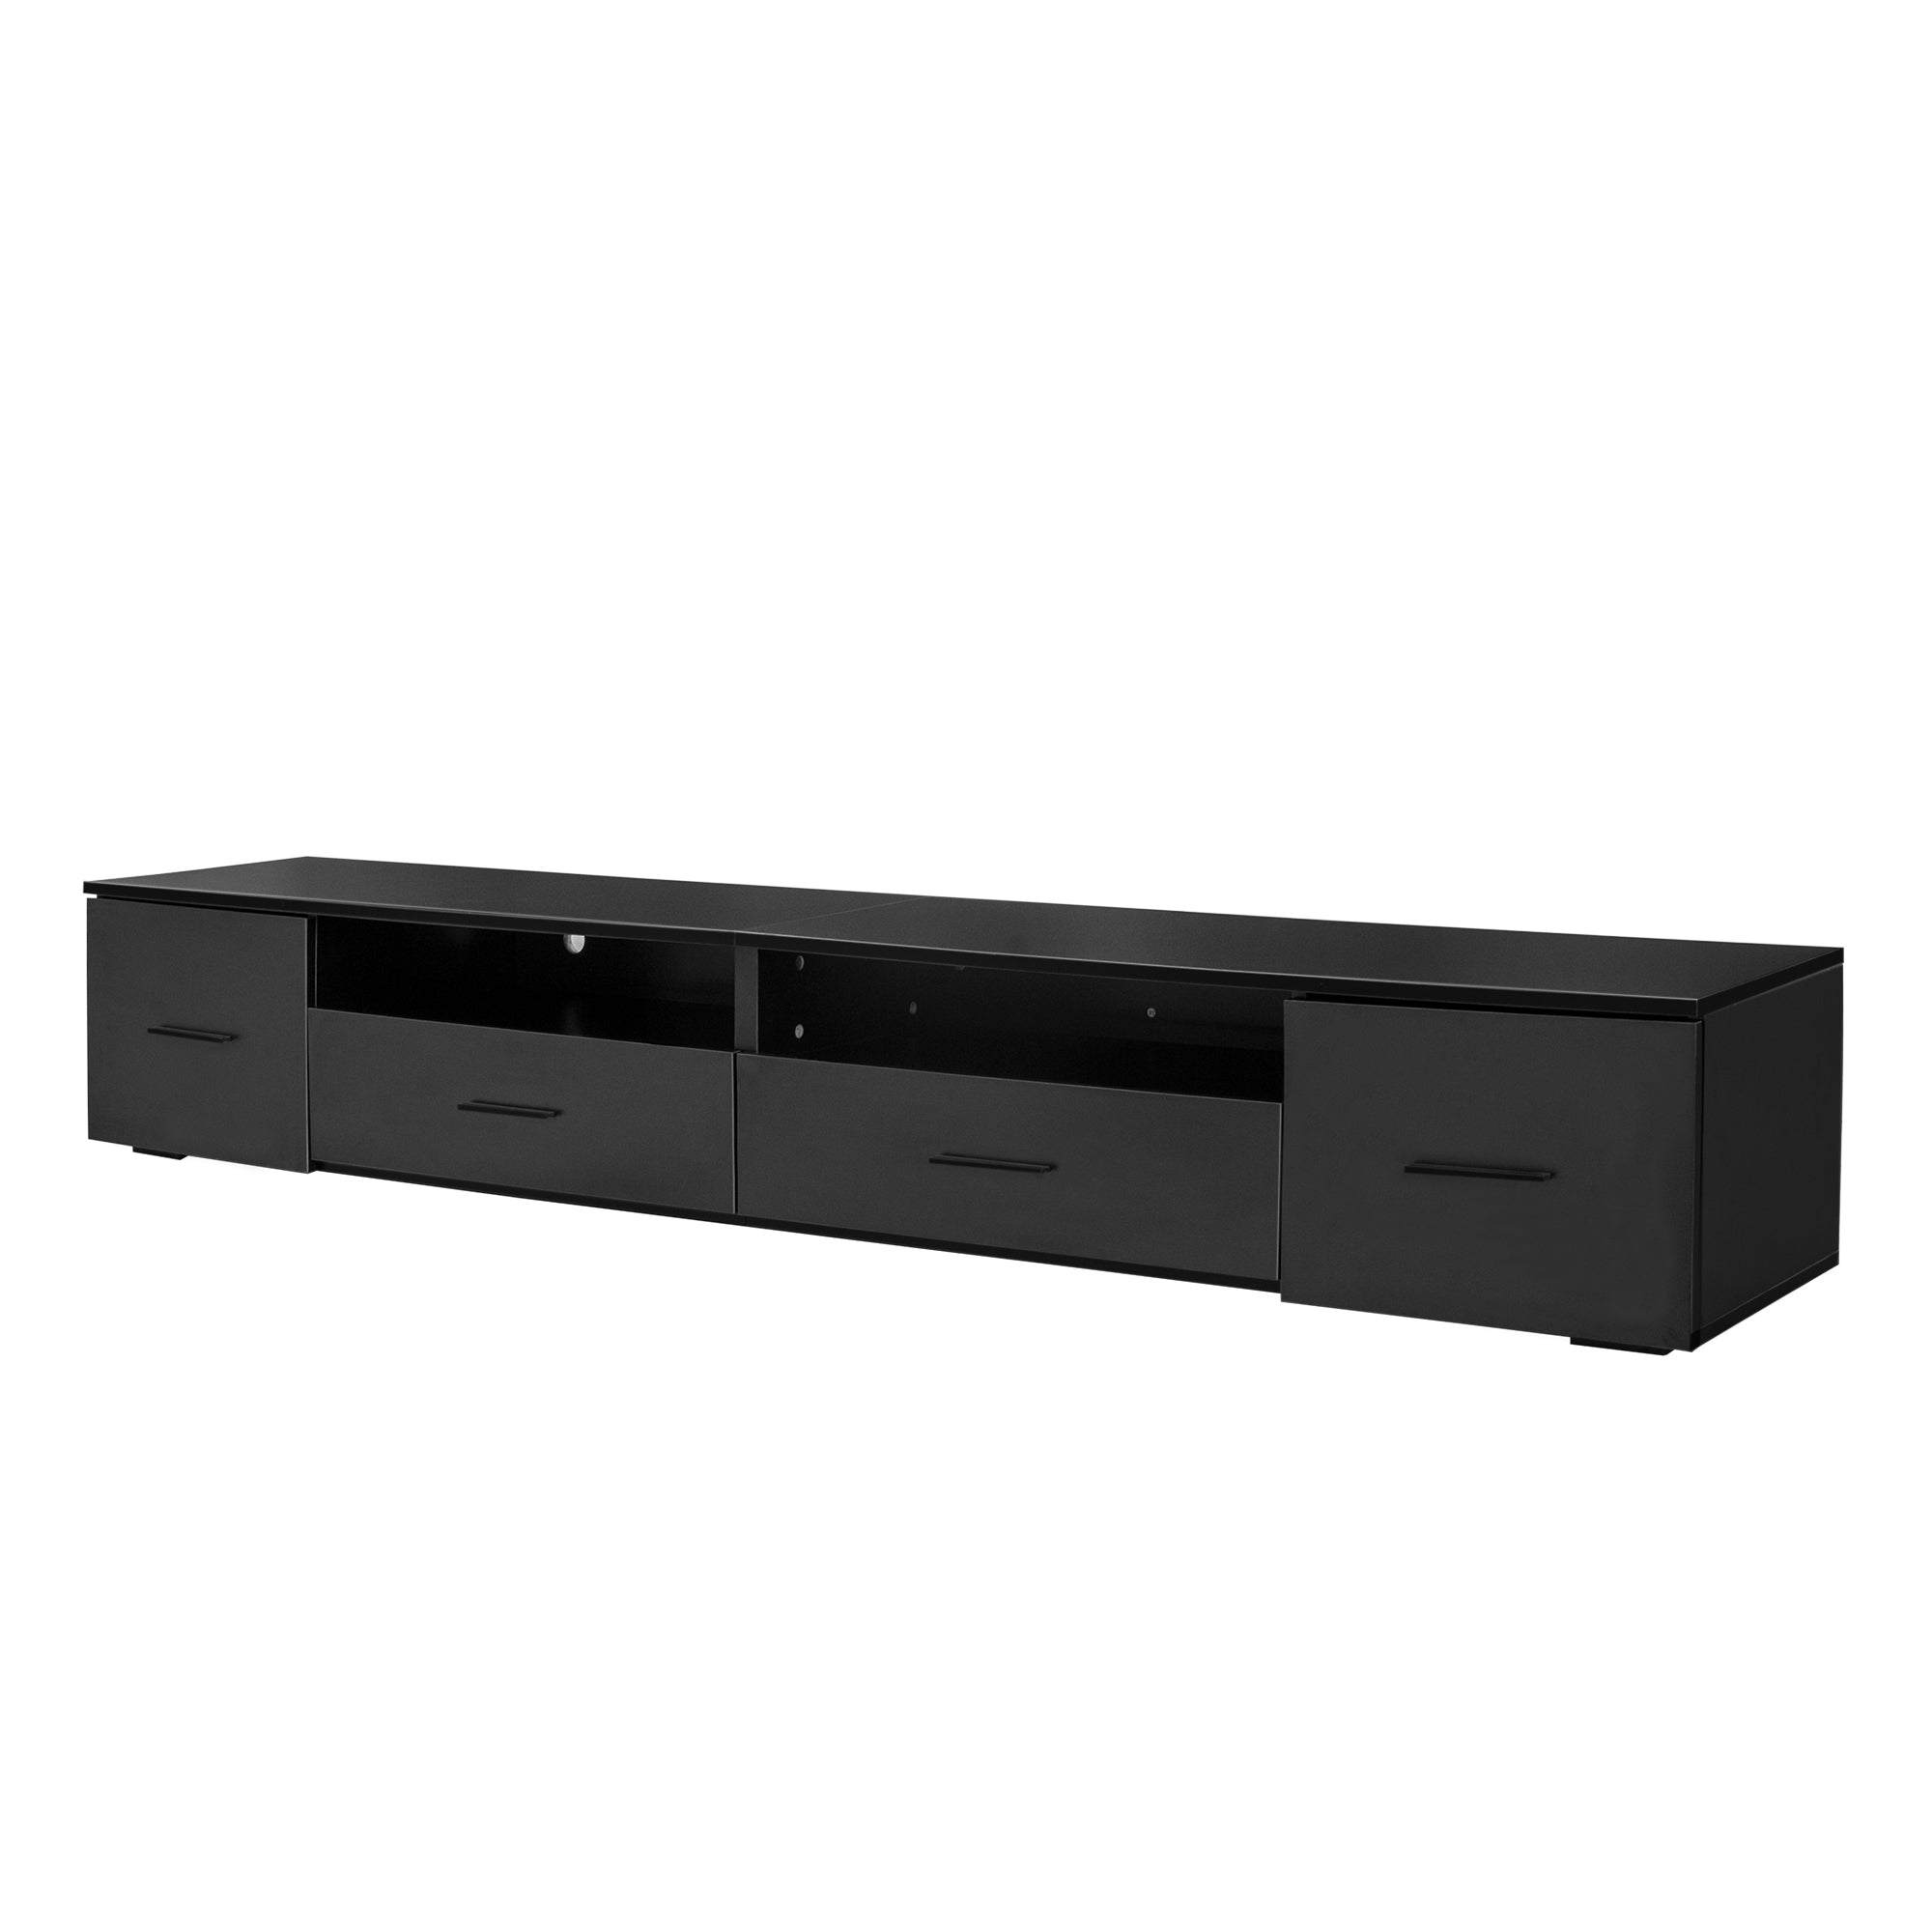 Black TV Stand for Living Room, Modern Entertainment black-particle board